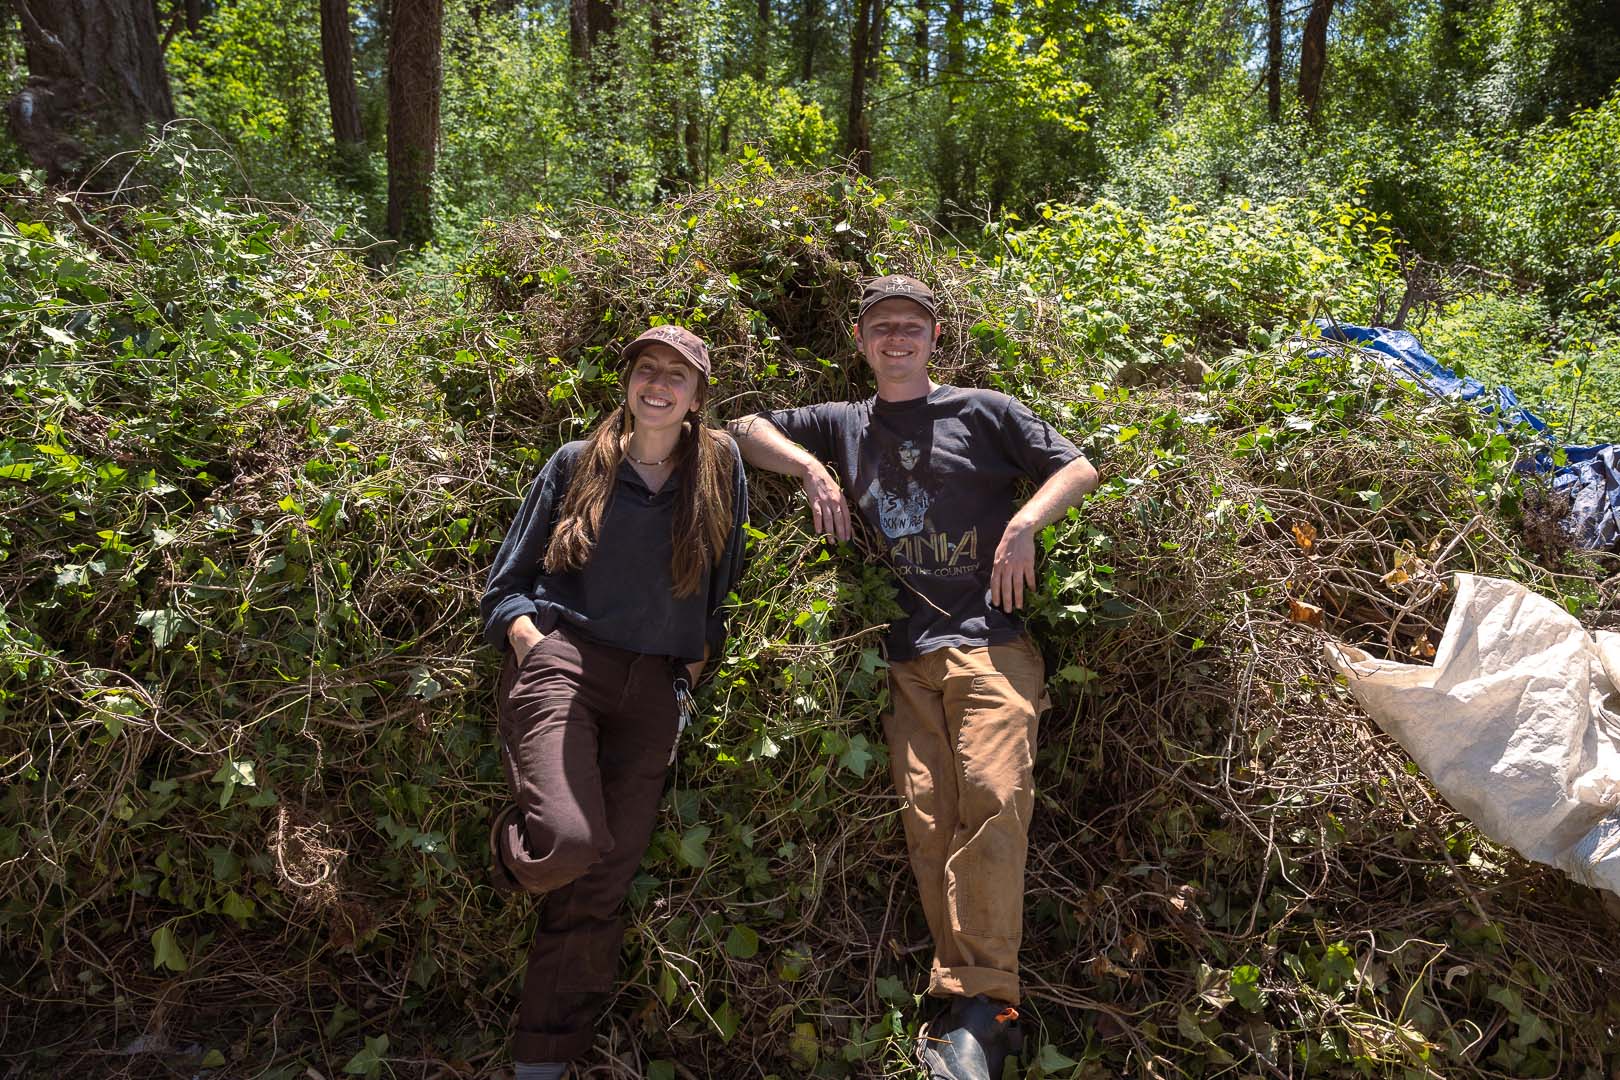 Two people smiling, leaning against a dense thicket of greenery